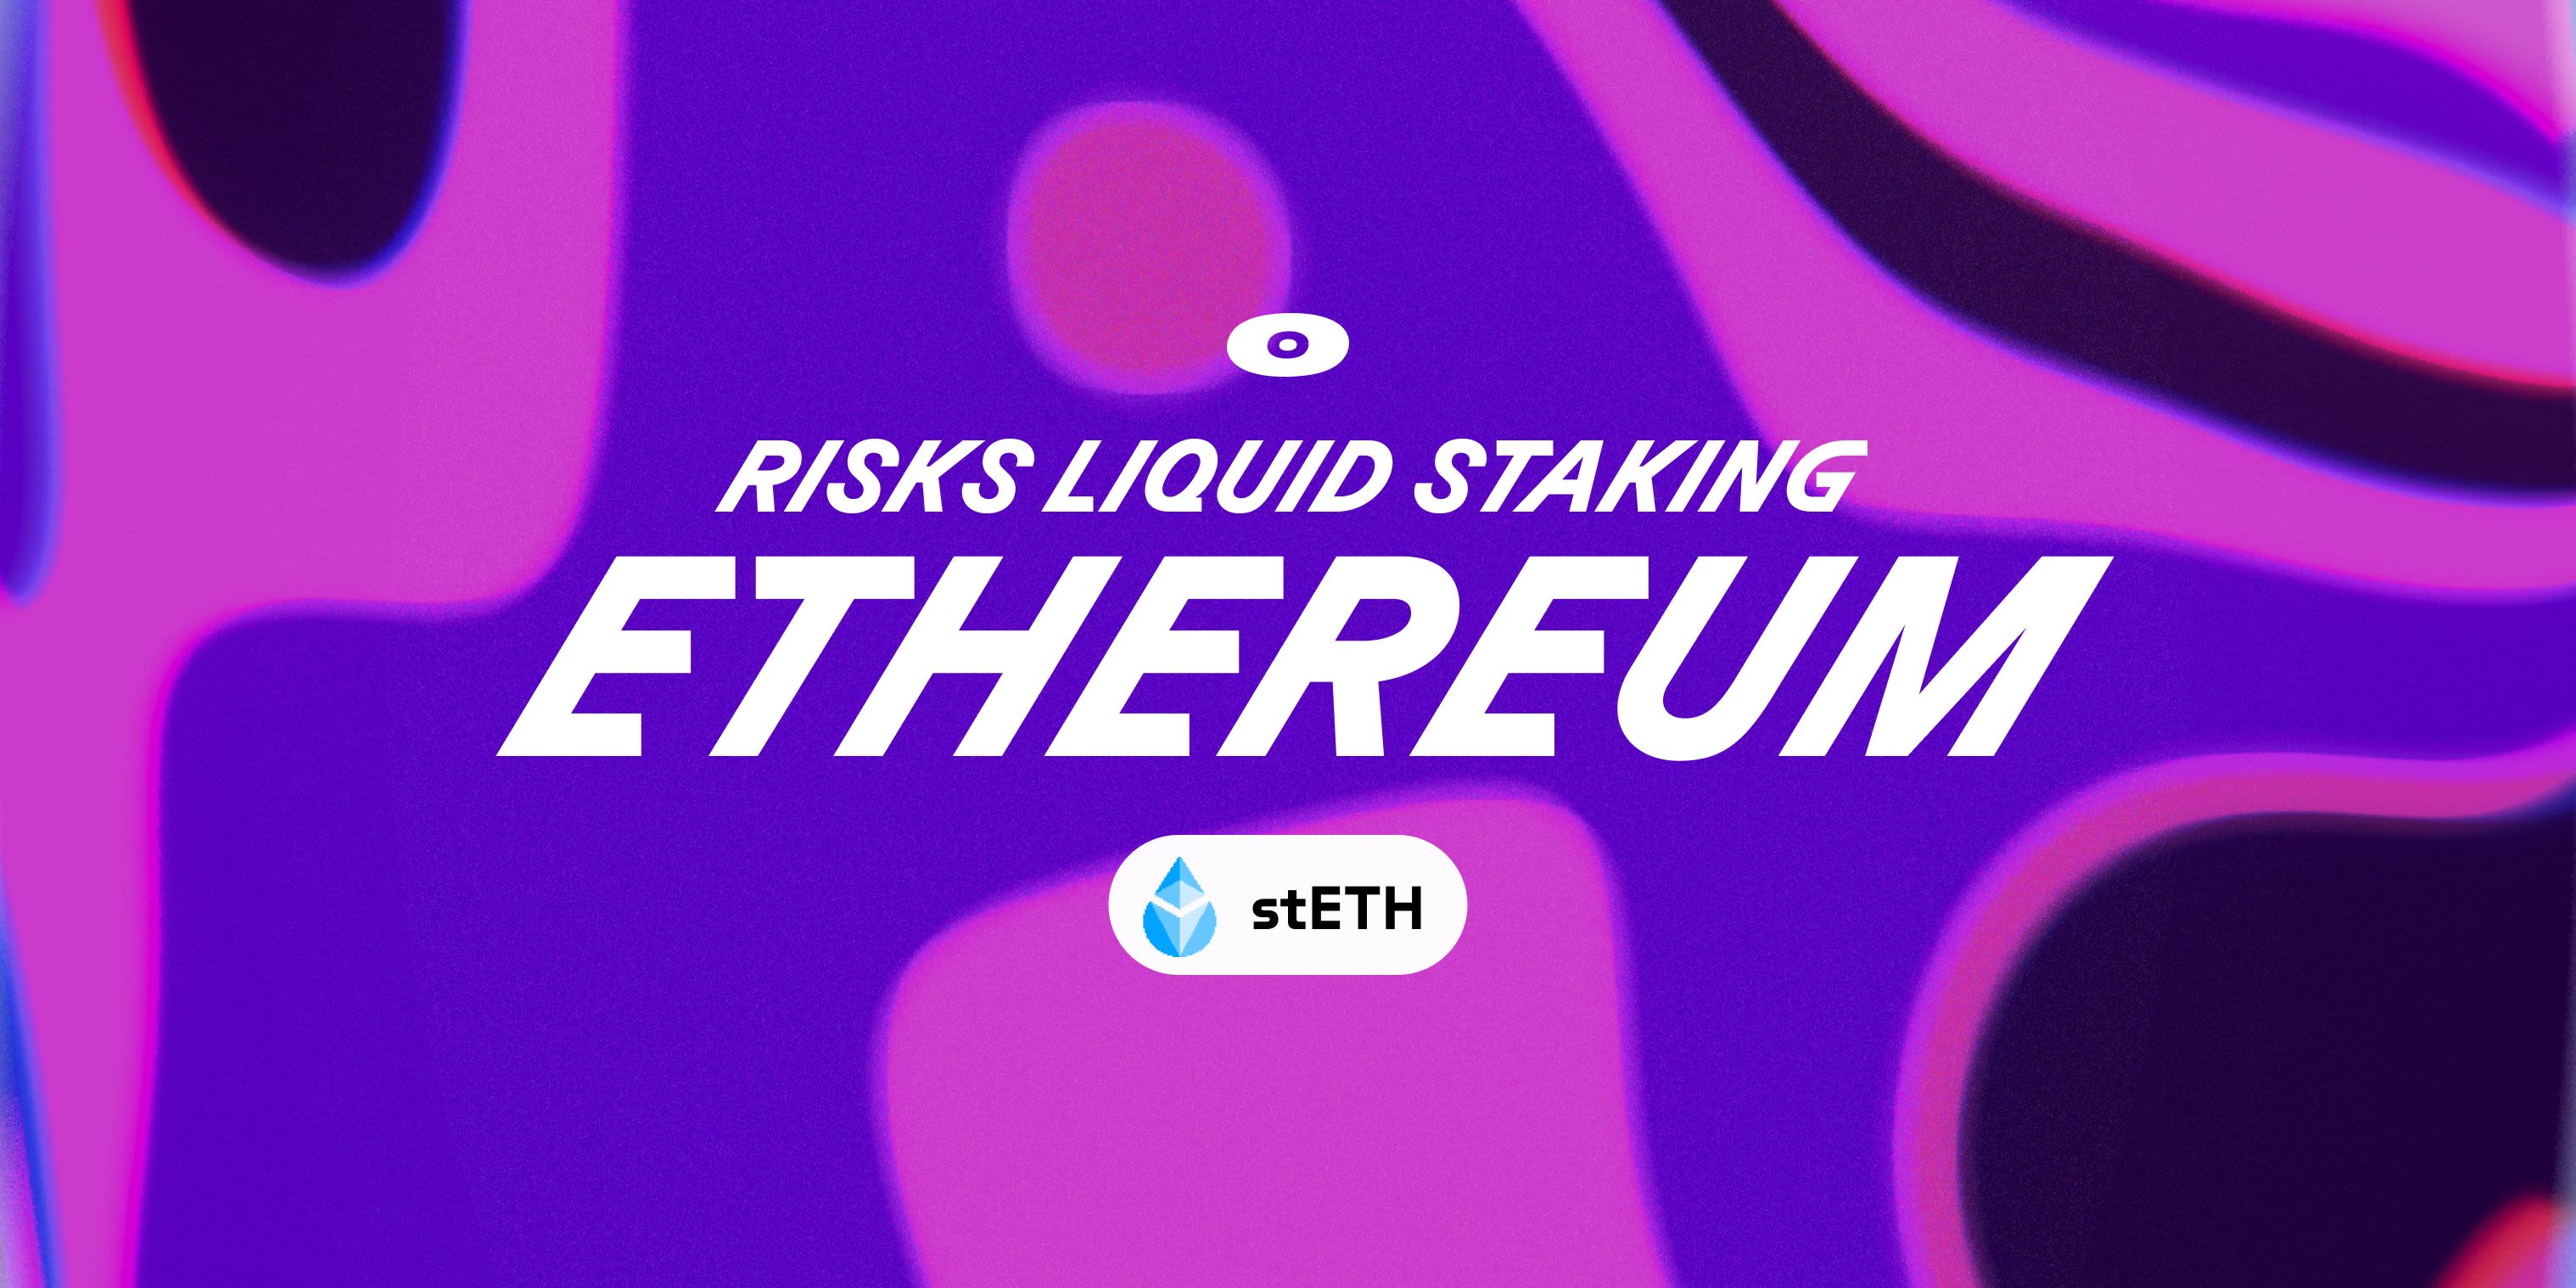 Cover Image for Risks of liquid staking ETH